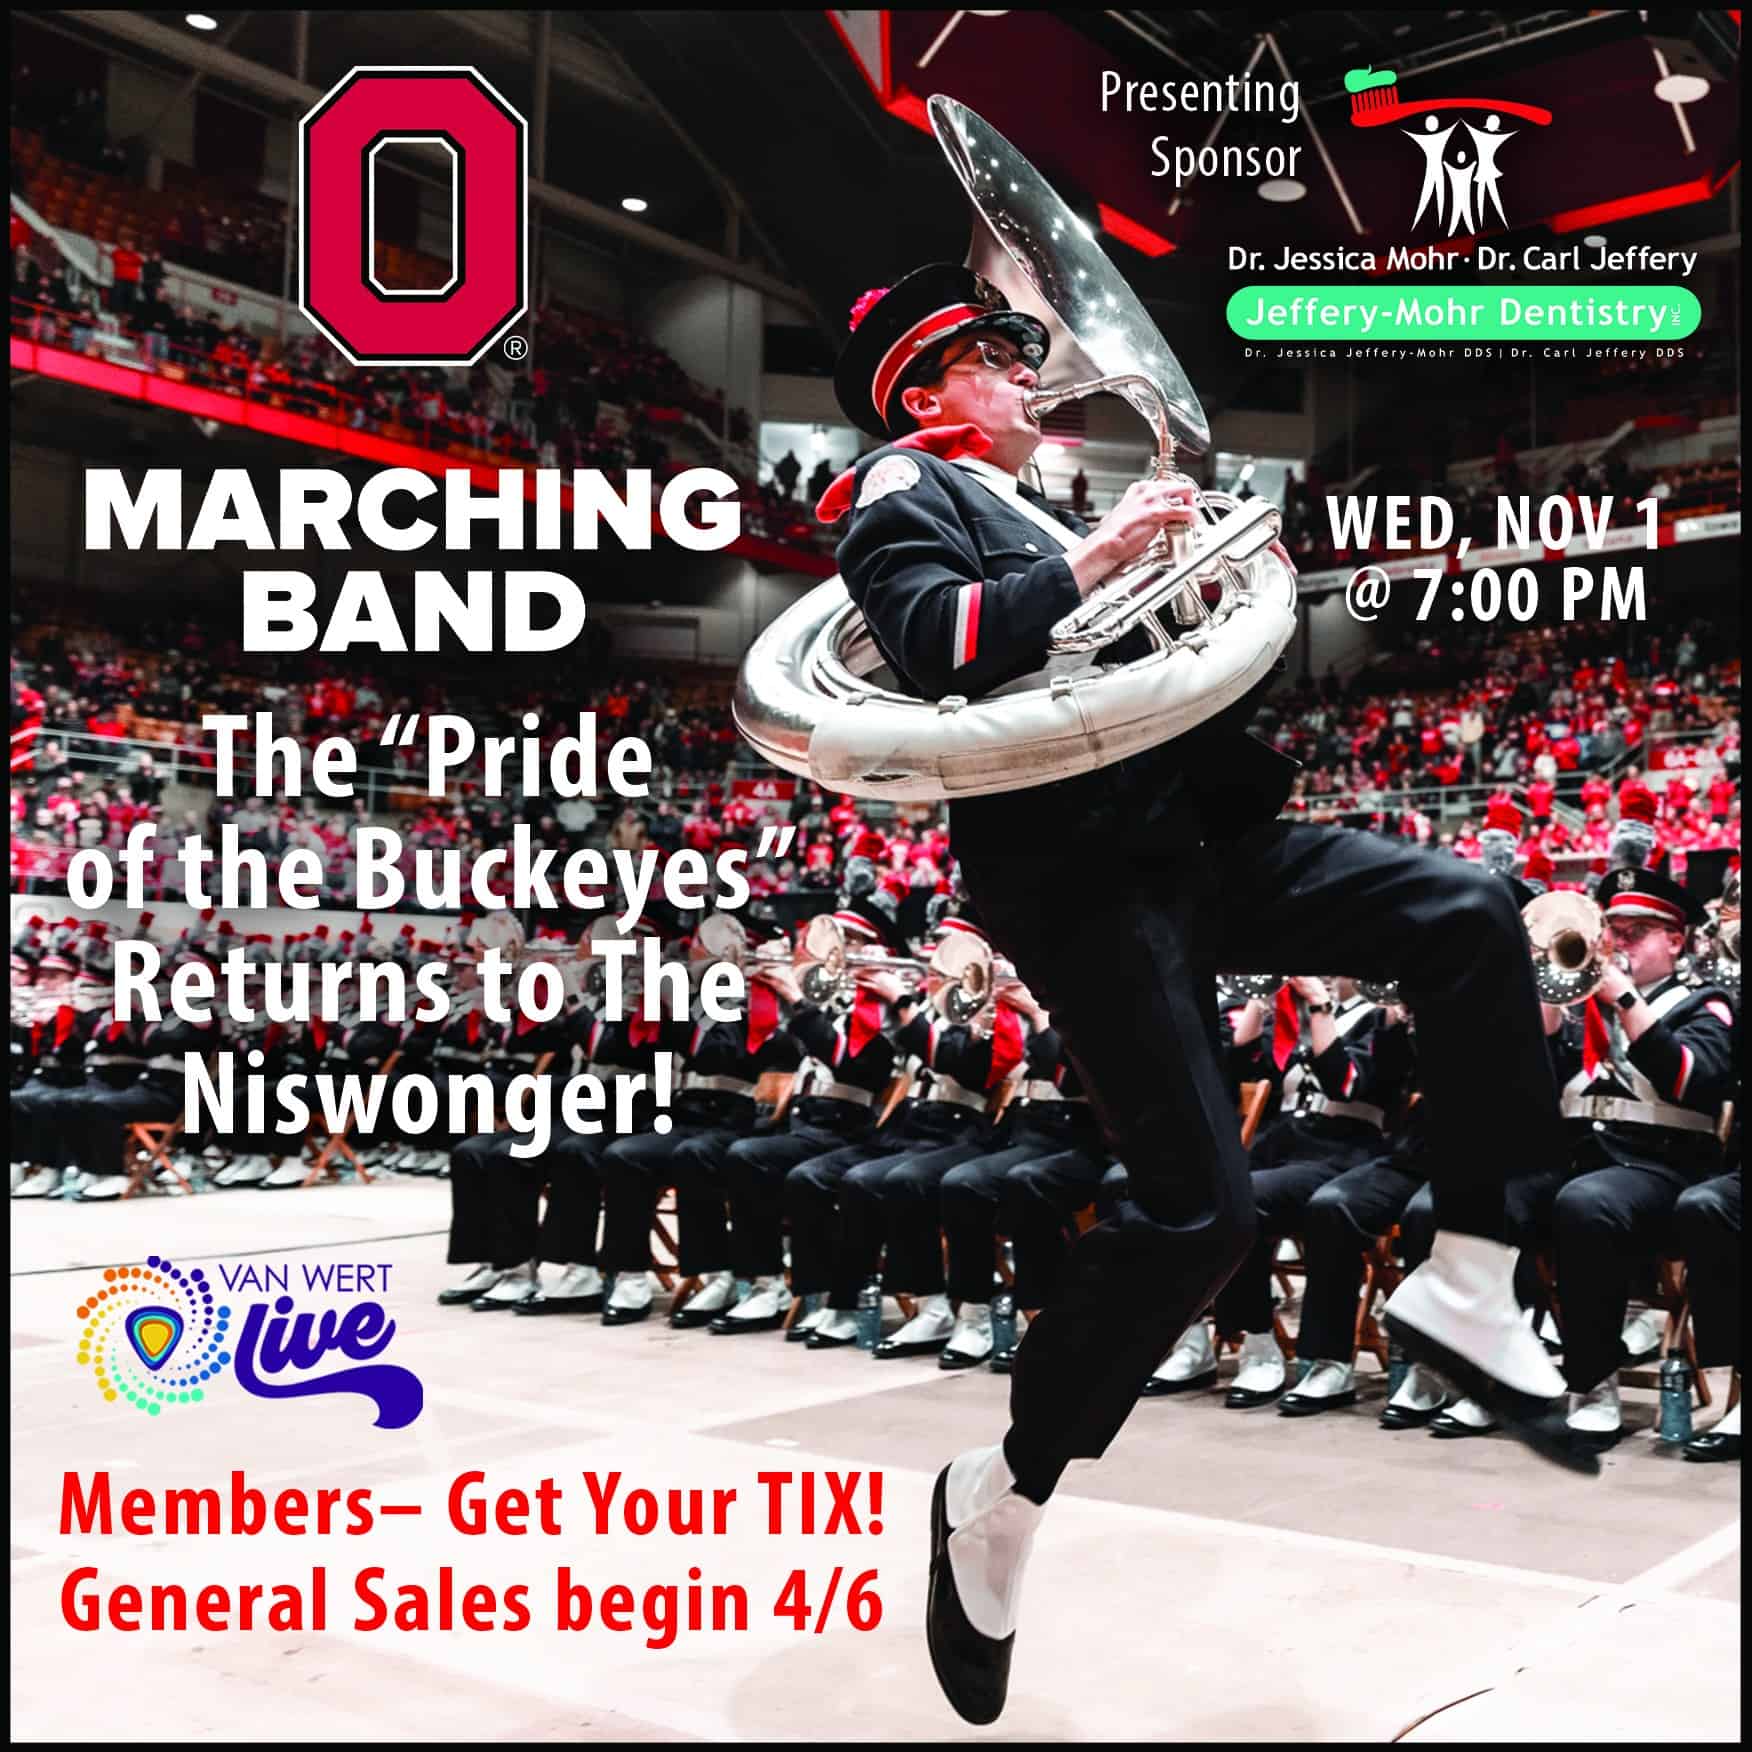 VW LIVE presents The Pride of the Buckeyes, The OSU Marching Band